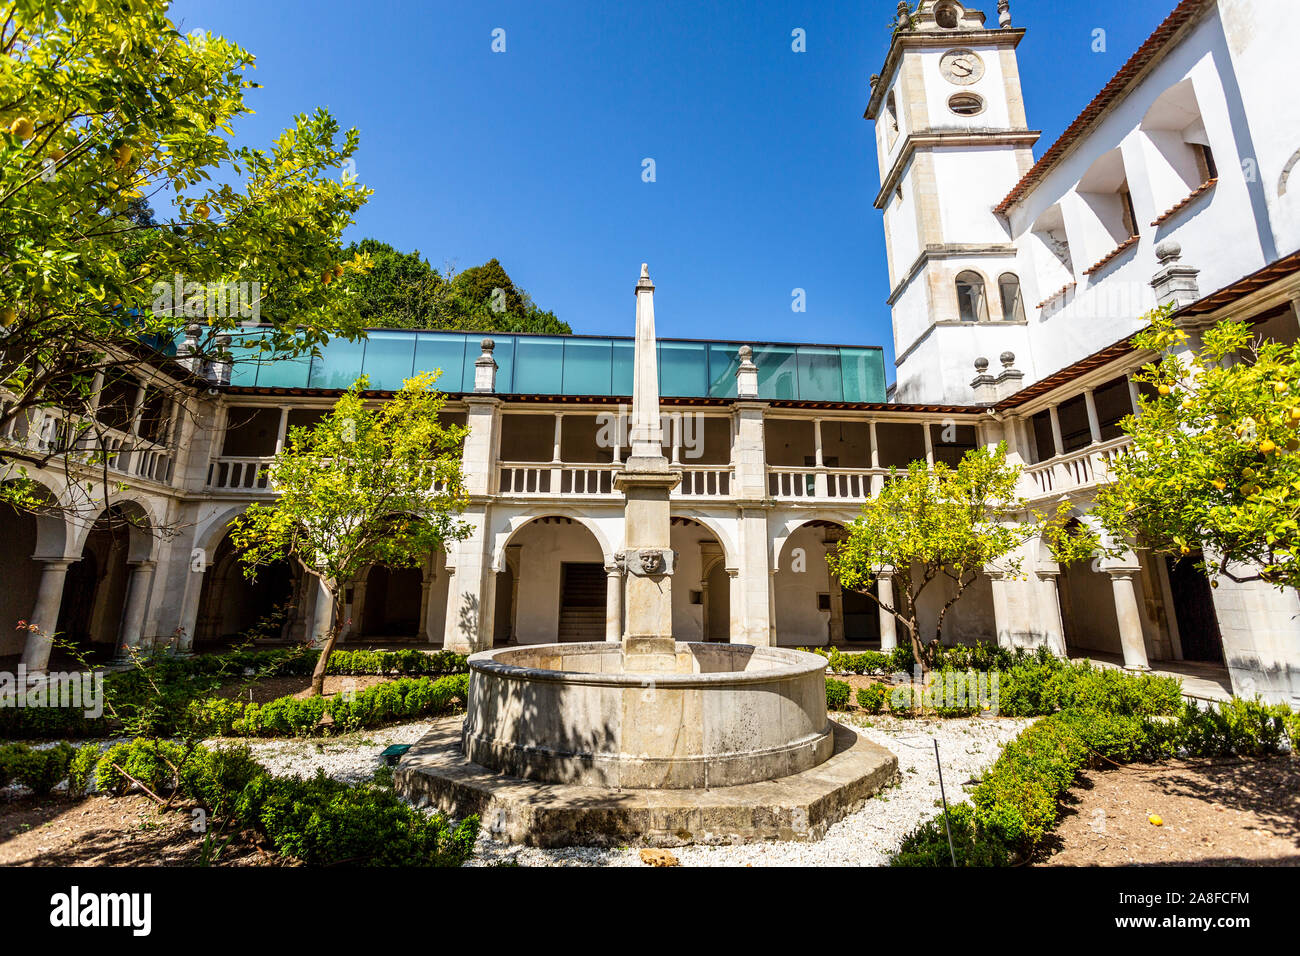 Water fountain of the Renaissance cloister of the Monastery of Saint Mary of Lorvao, Coimbra, Portugal Stock Photo